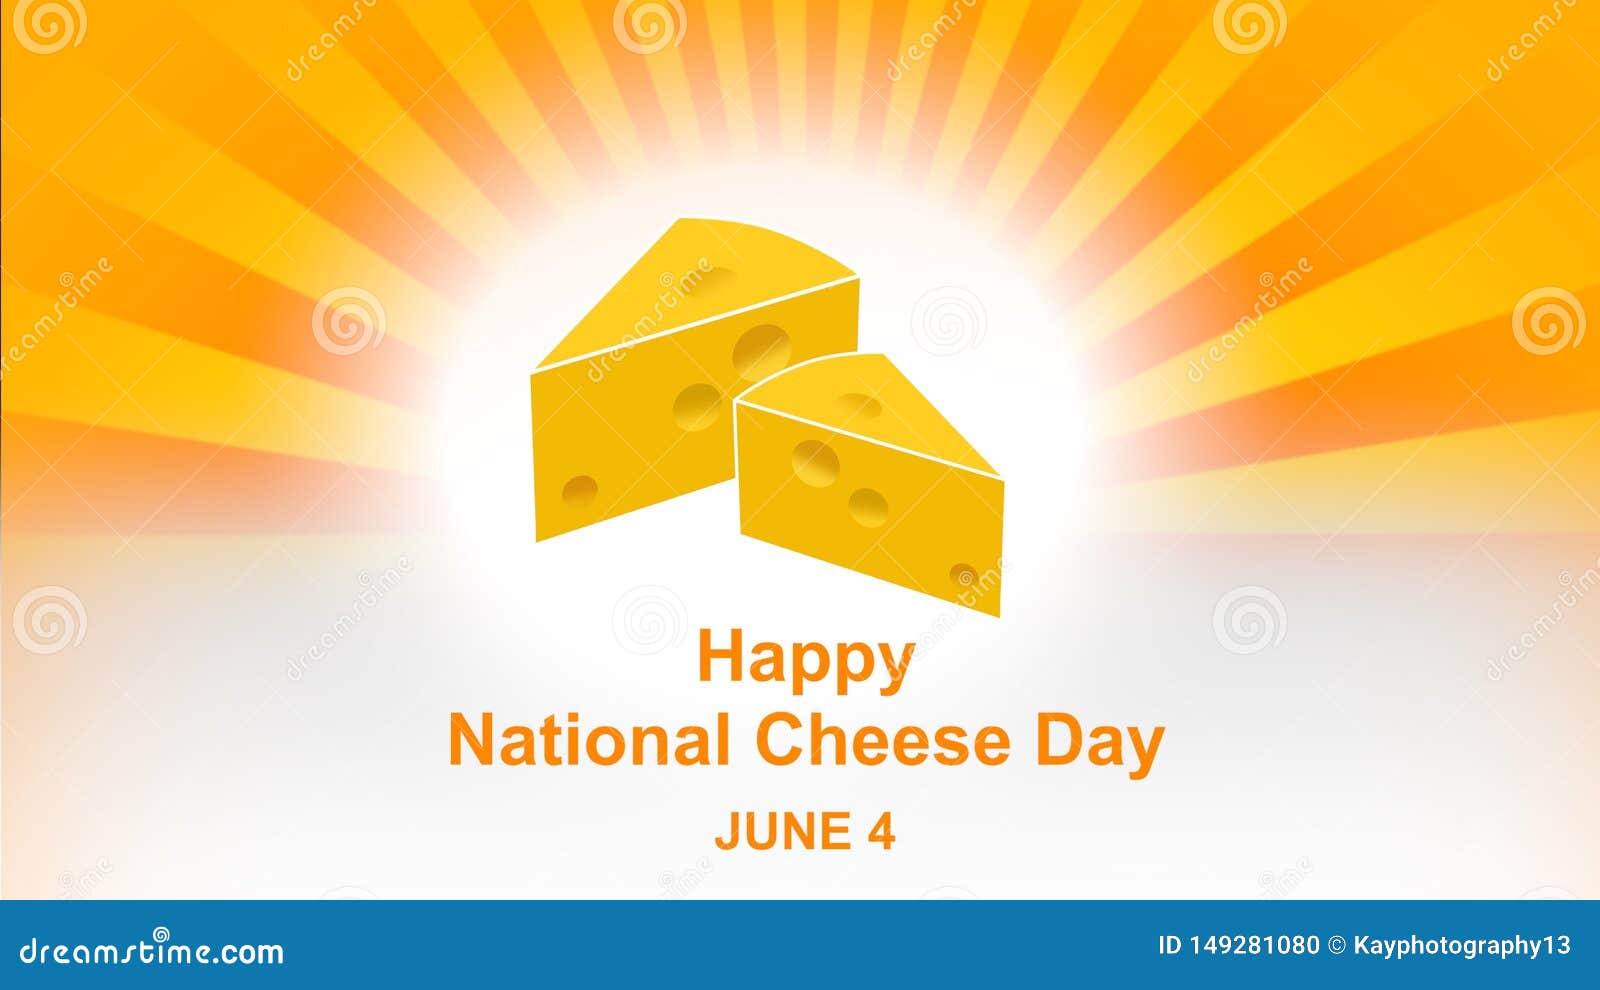 National Cheese Day On June 4 Cartoon Icon On A Yellow Background